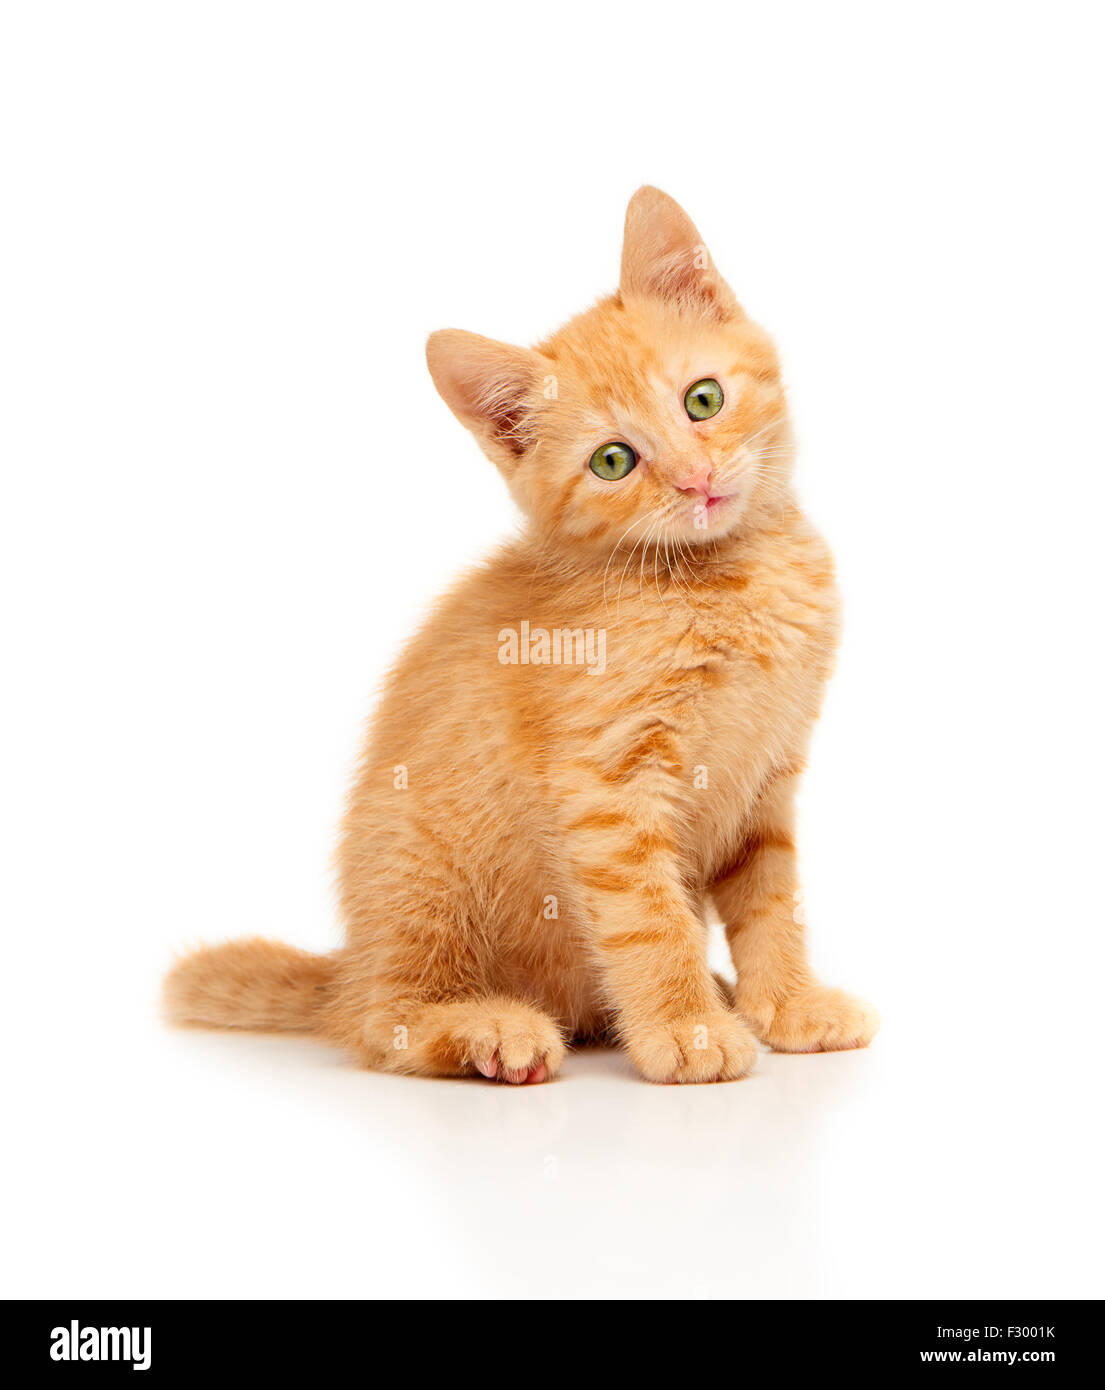 Cute little red kitten sitting and looking straight at camera, isolated on a white background Stock Photo